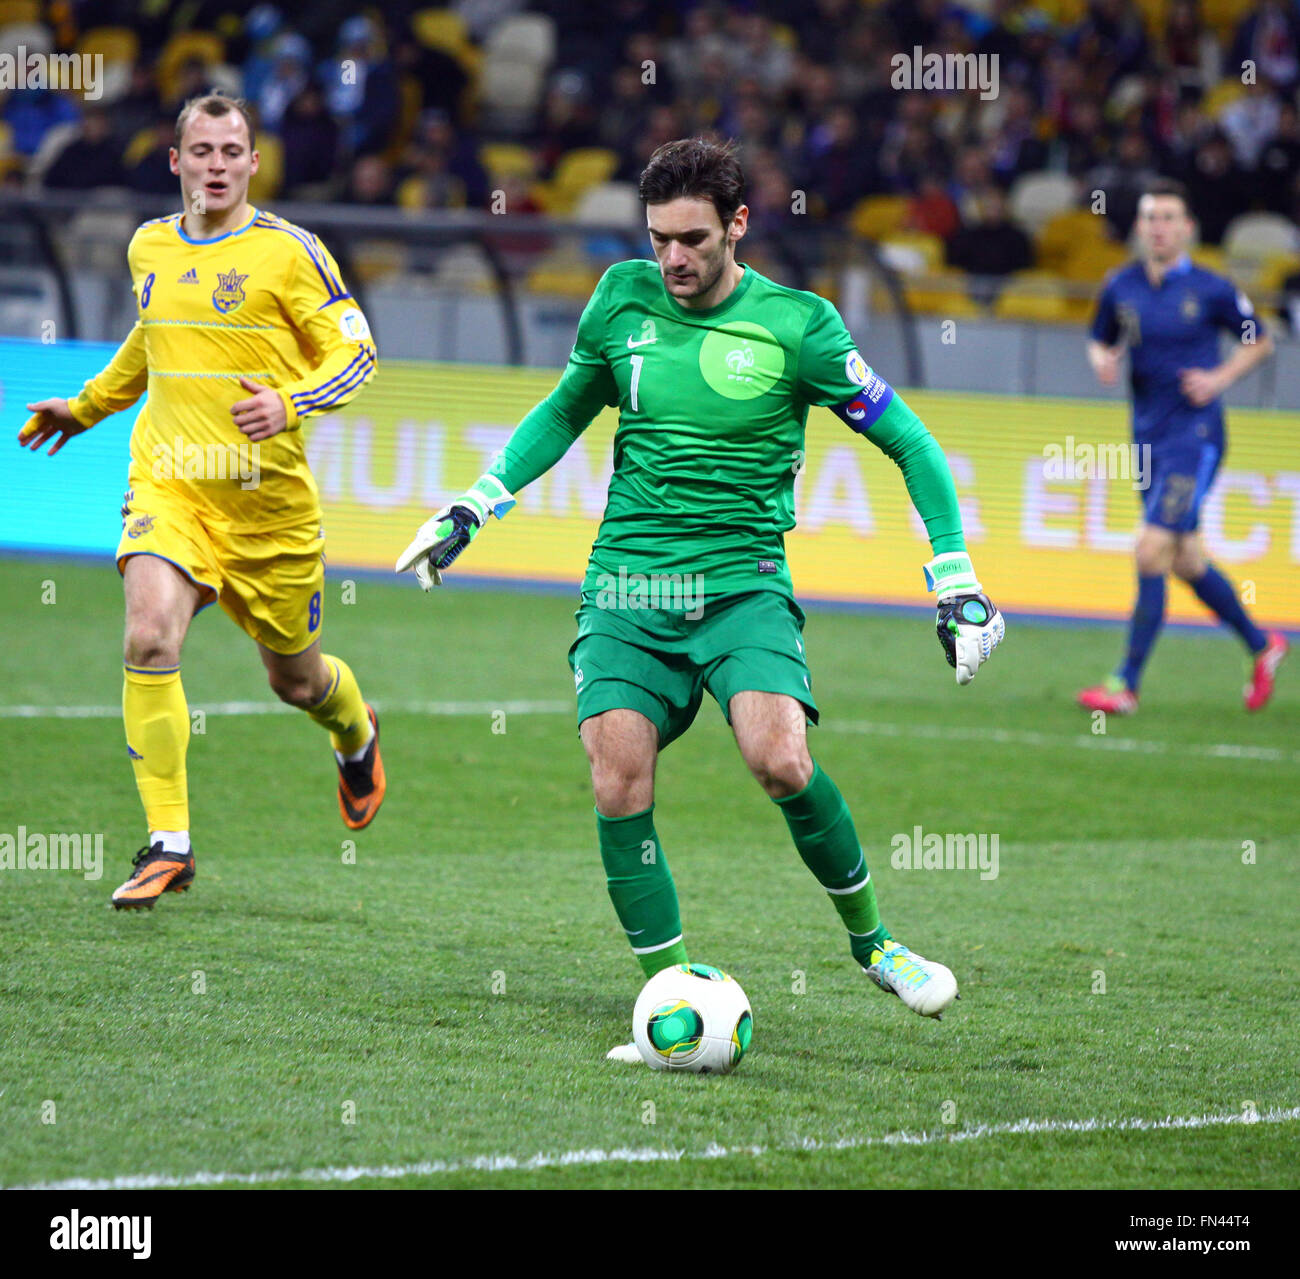 KYIV, UKRAINE - NOVEMBER 15, 2013: Goalkeeper Hugo Lloris of France in action during FIFA World Cup 2014 play-off game against U Stock Photo